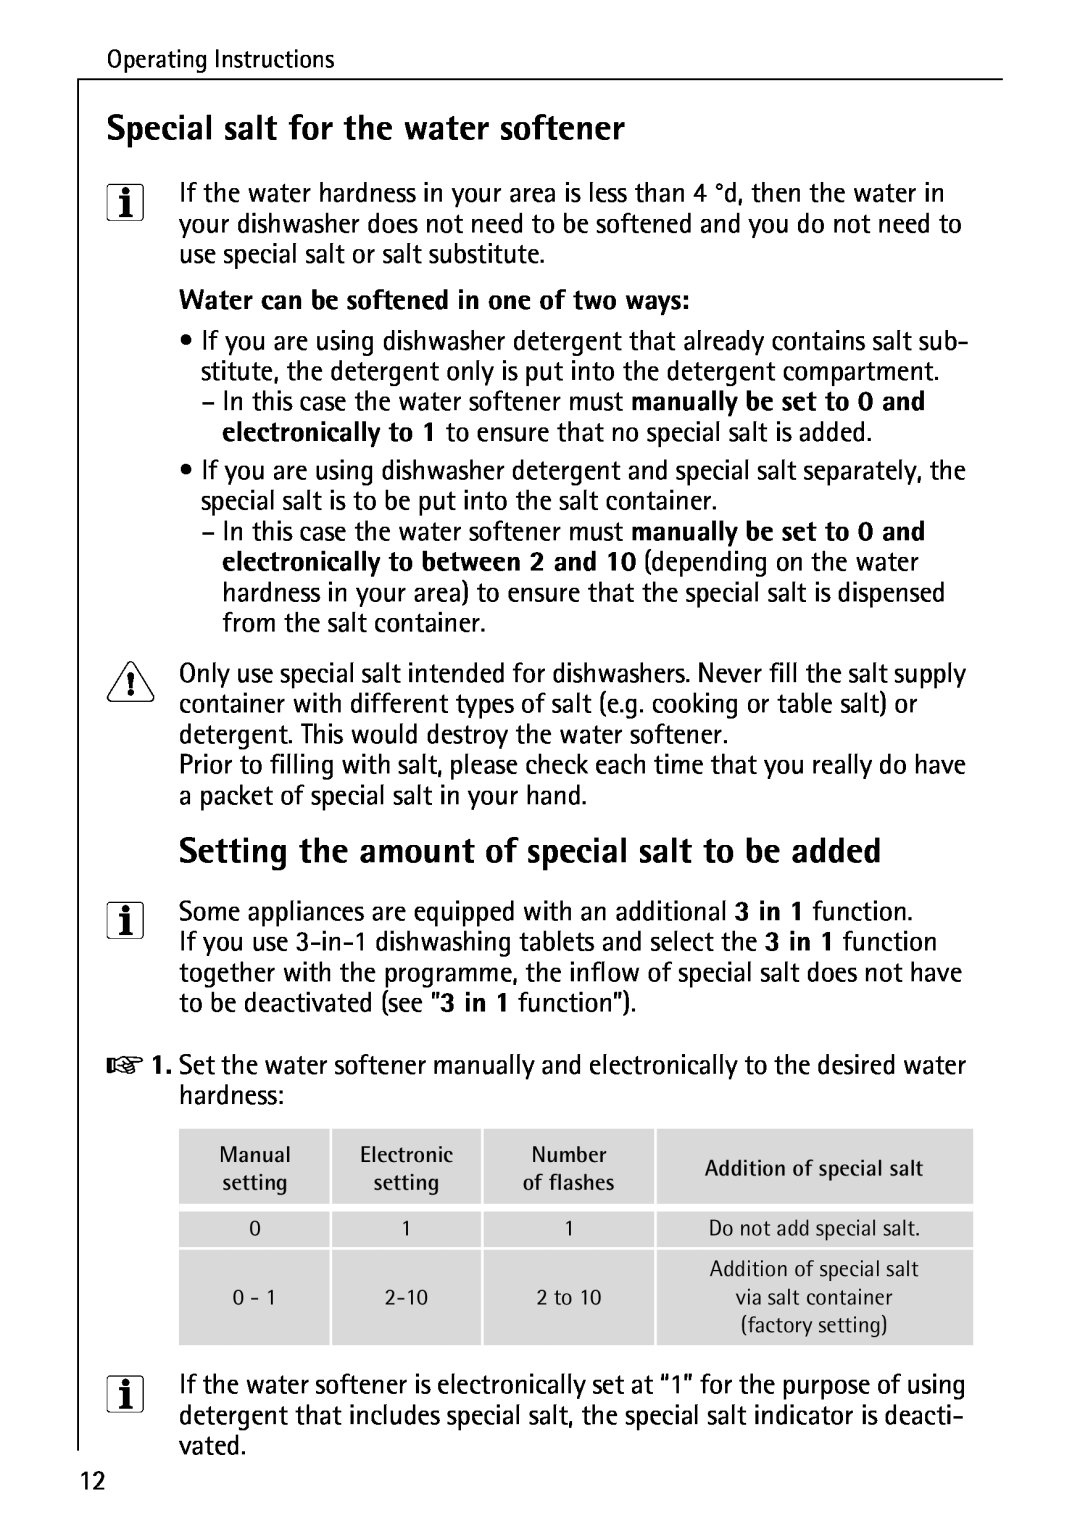 AEG 40740 manual Special salt for the water softener, Setting the amount of special salt to be added 